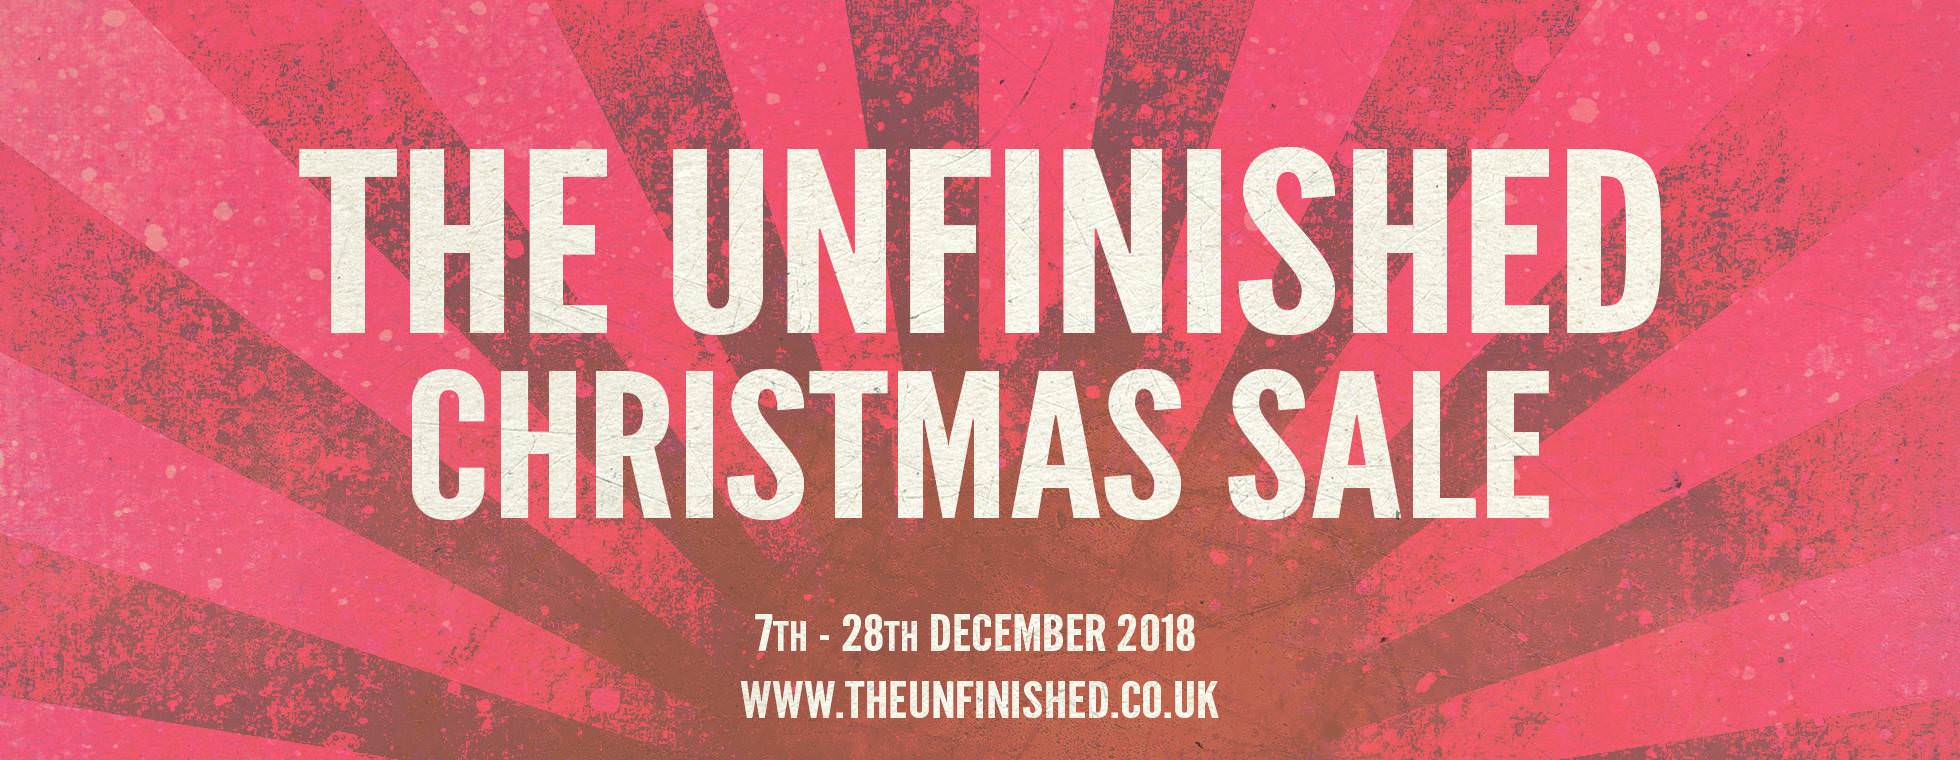 The Unfinished Christmas Sale is here!